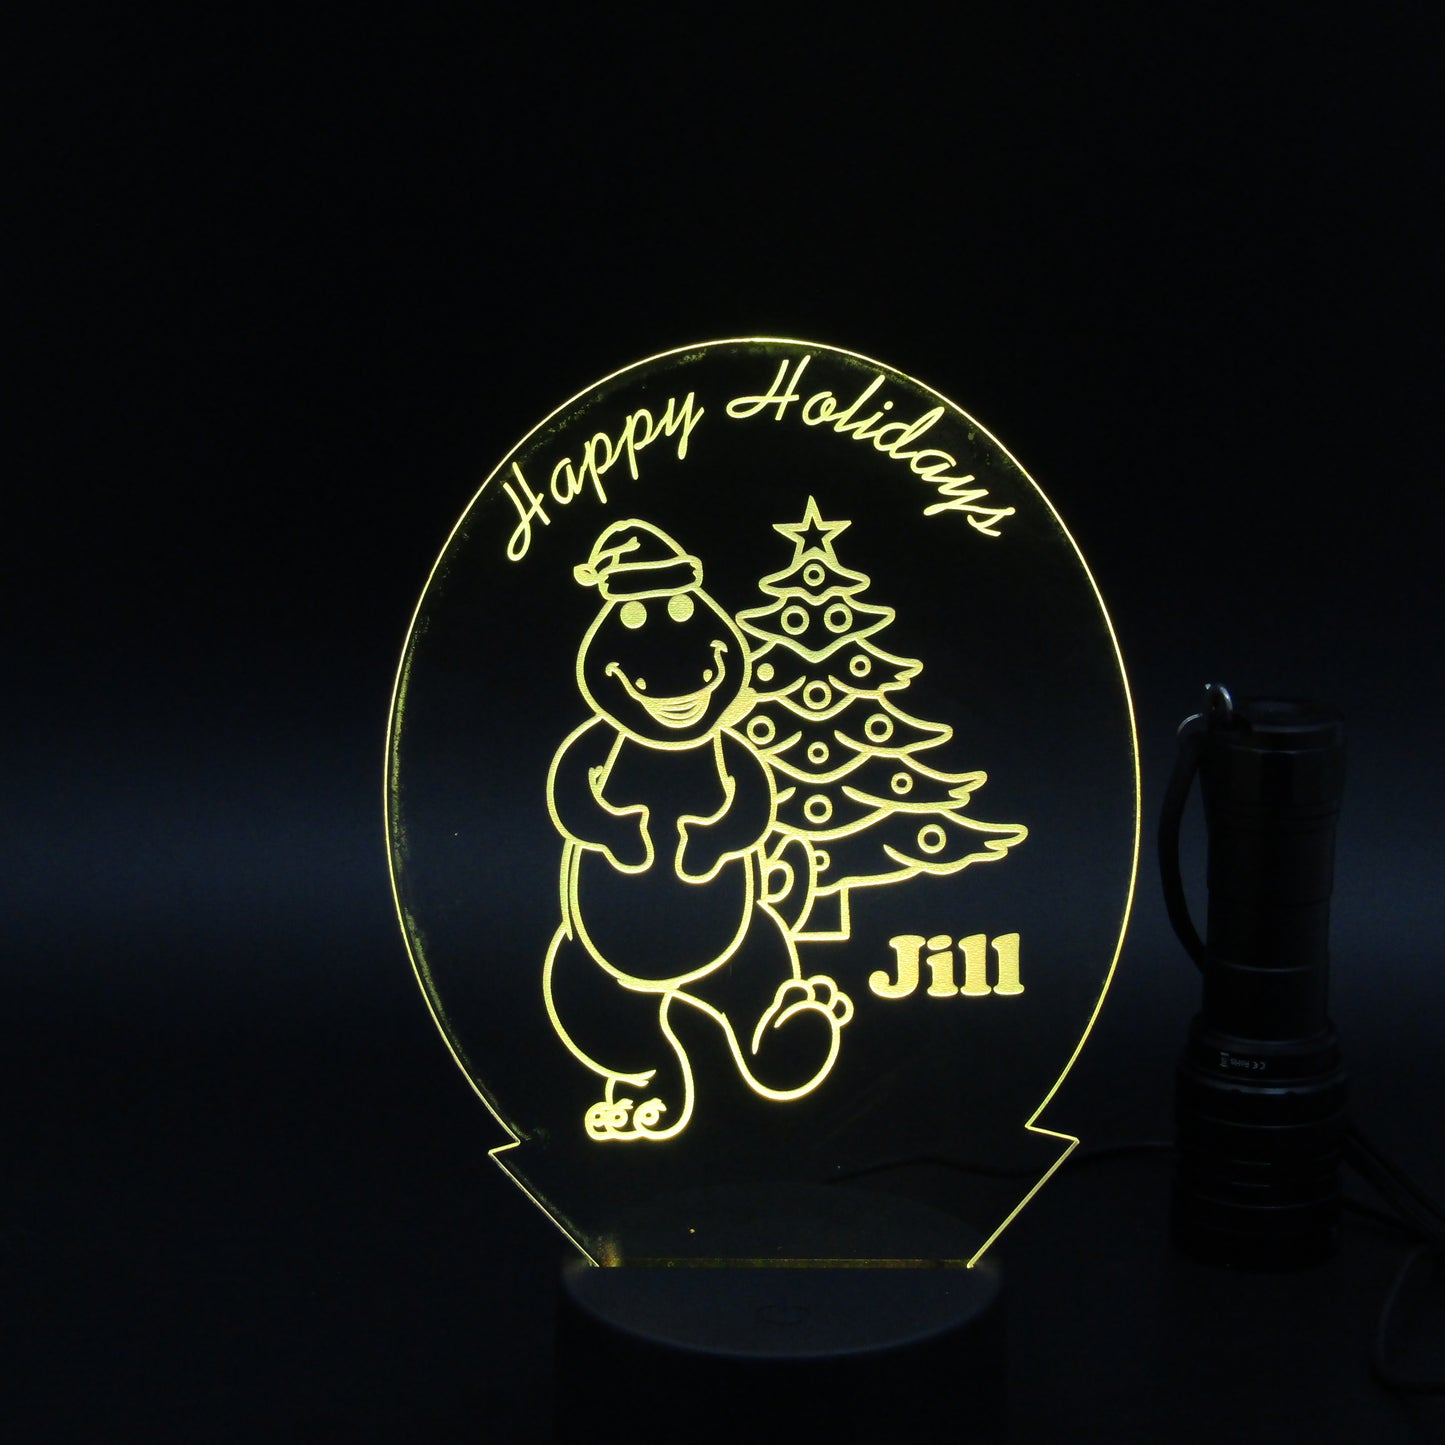 Personalized Christmas gift 3D night light